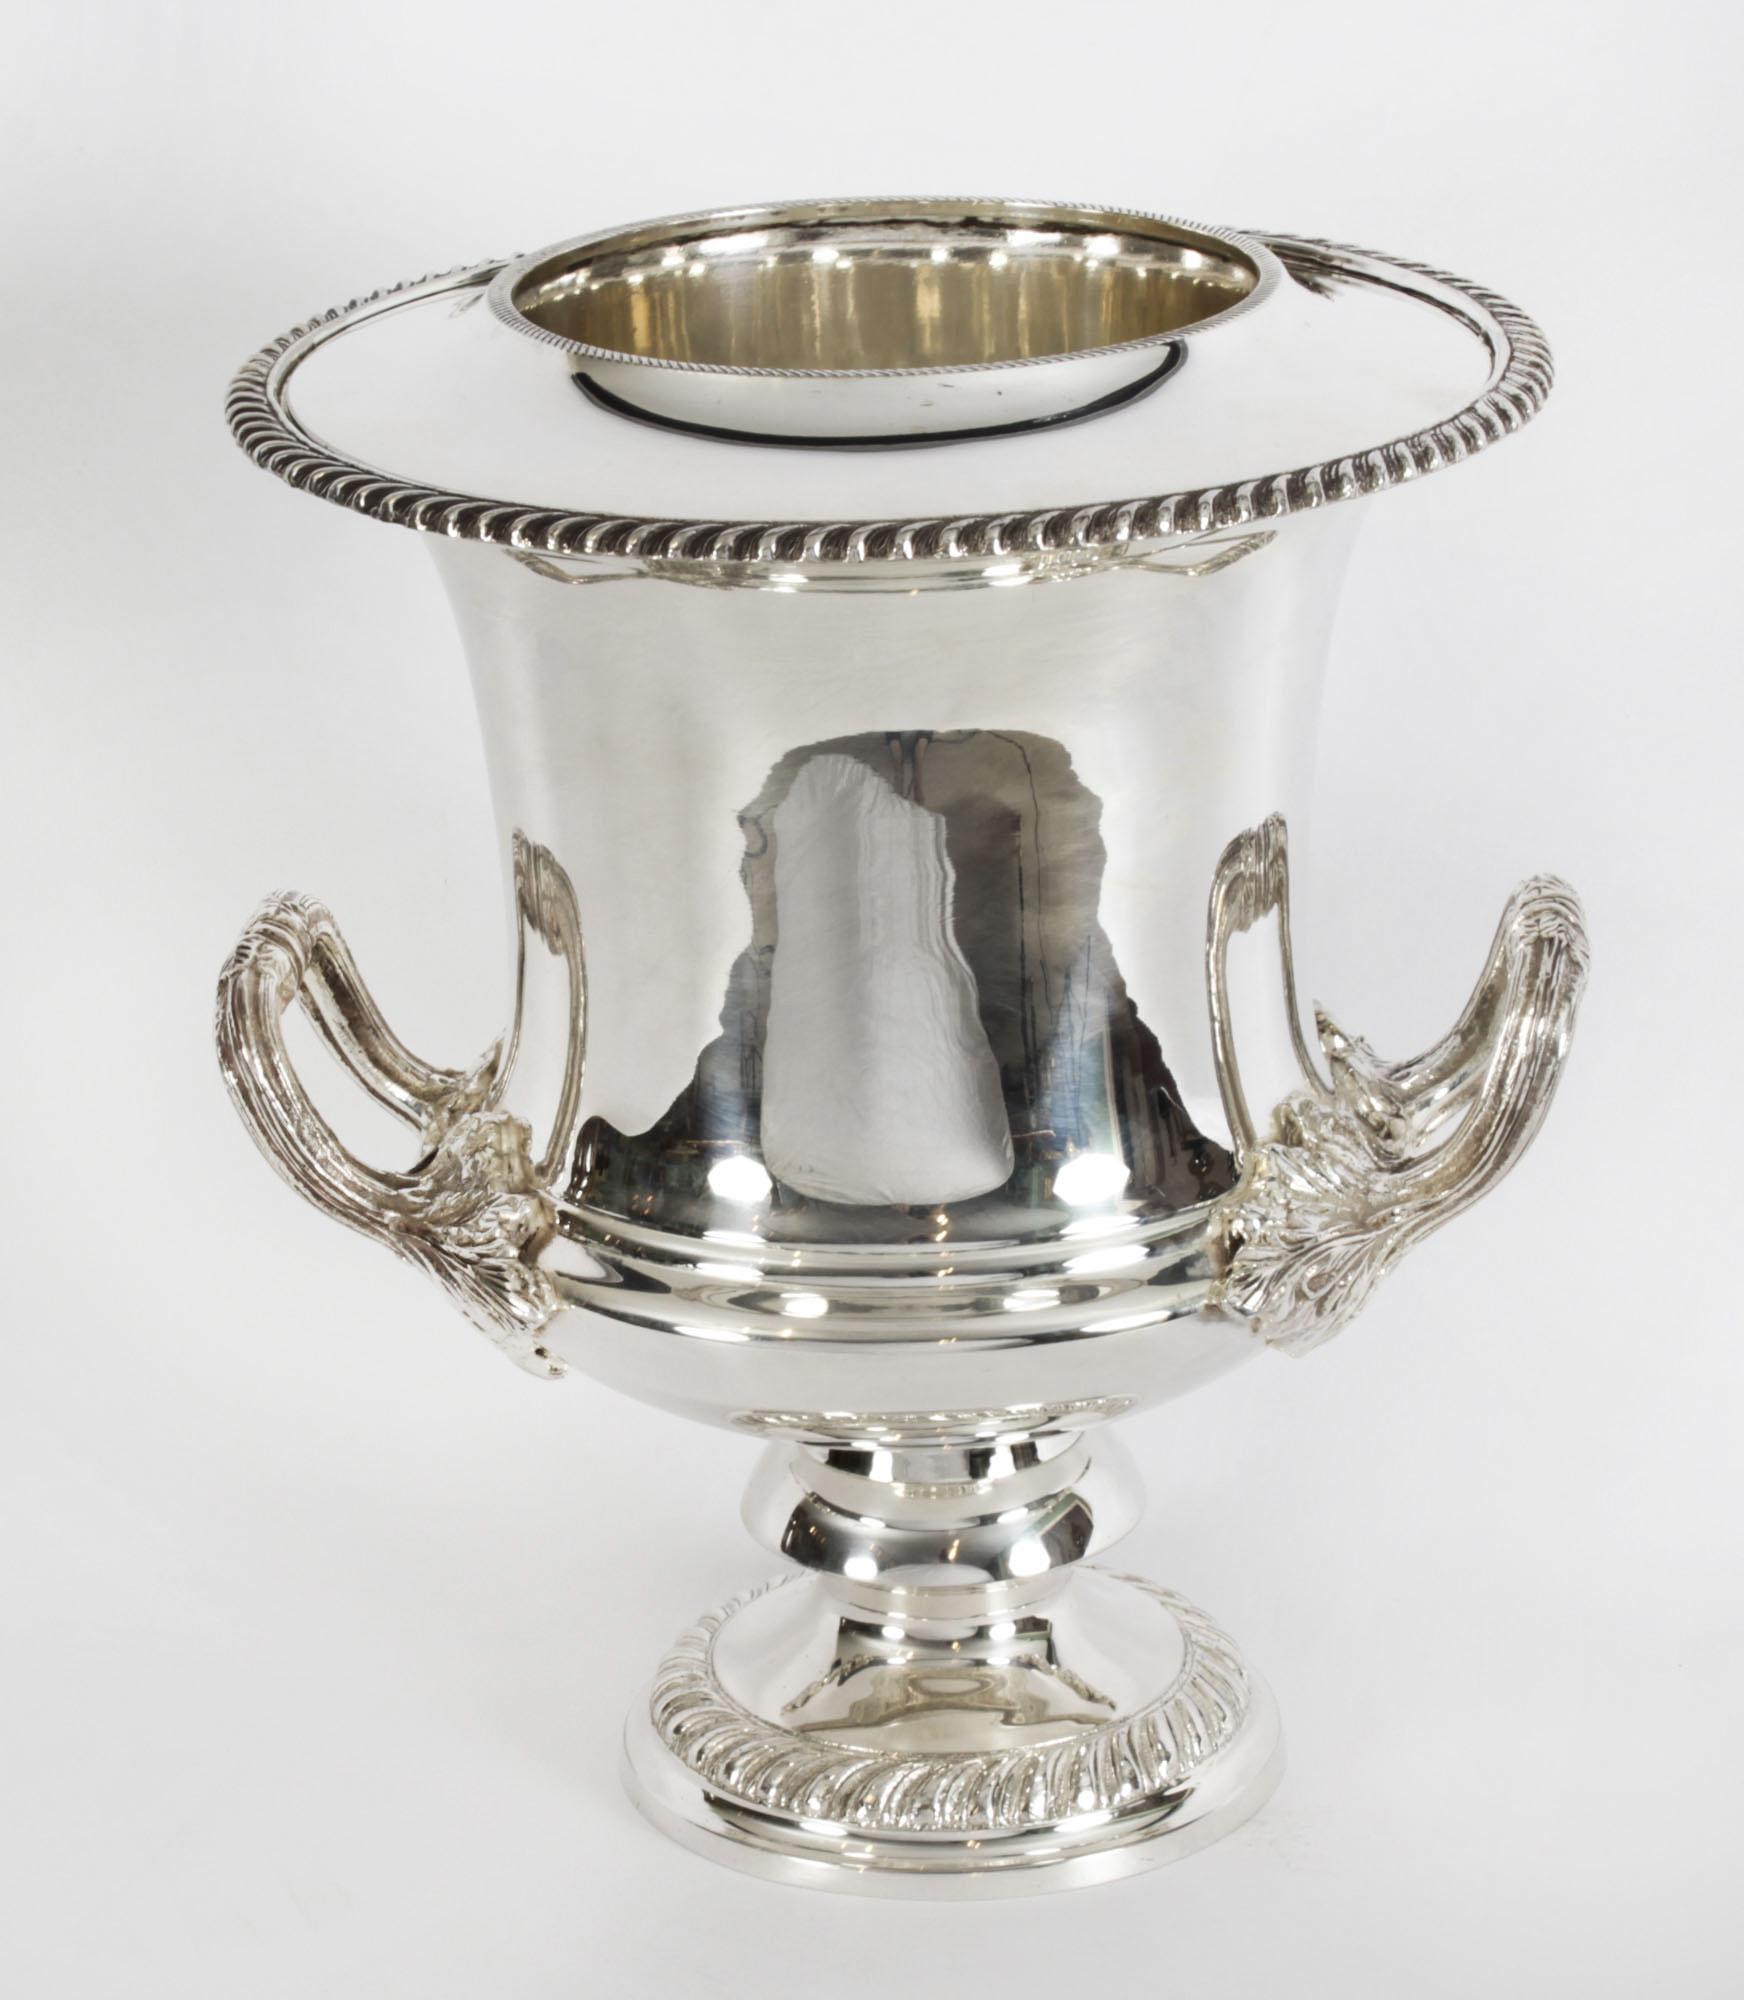 A gorgeous Vintage silver plated wine/champagne cooler in the classic Georgian style and dating from the early 20th Century.

There is no mistaking the unique quality and design of this cooler and it is assured to lend your home a touch of